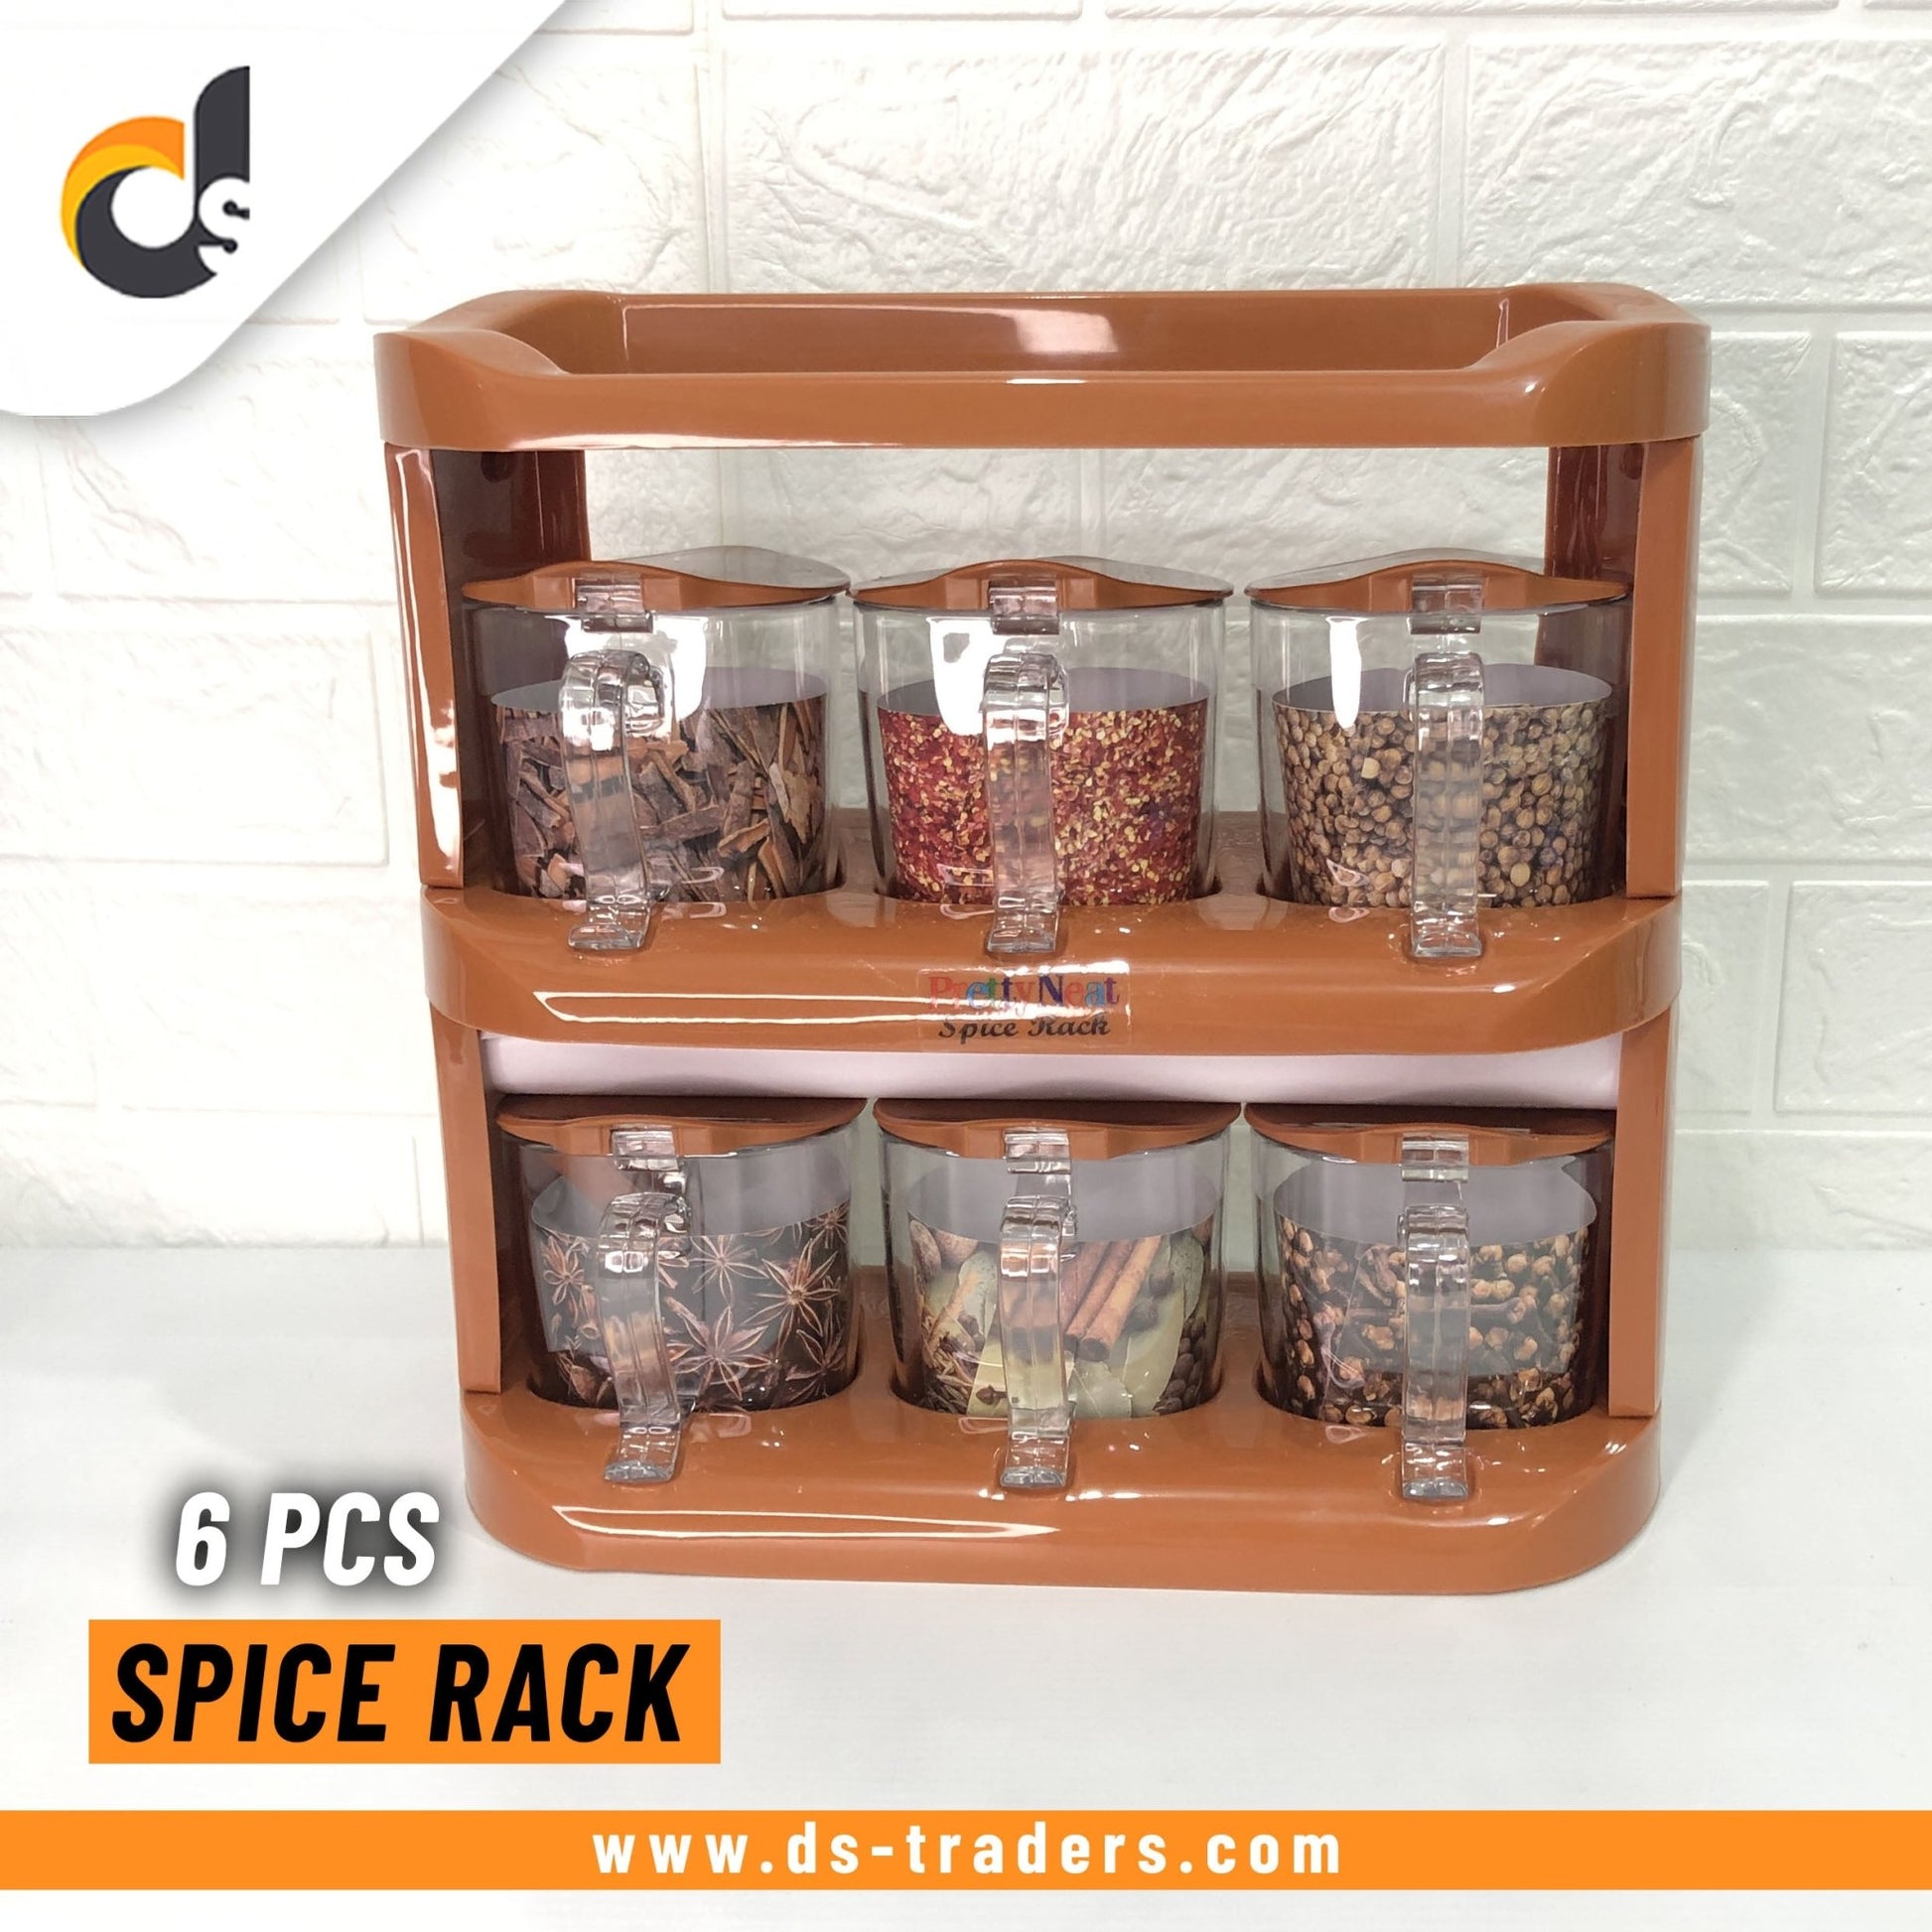 6 In 1 Spice Rack Set - DS Traders